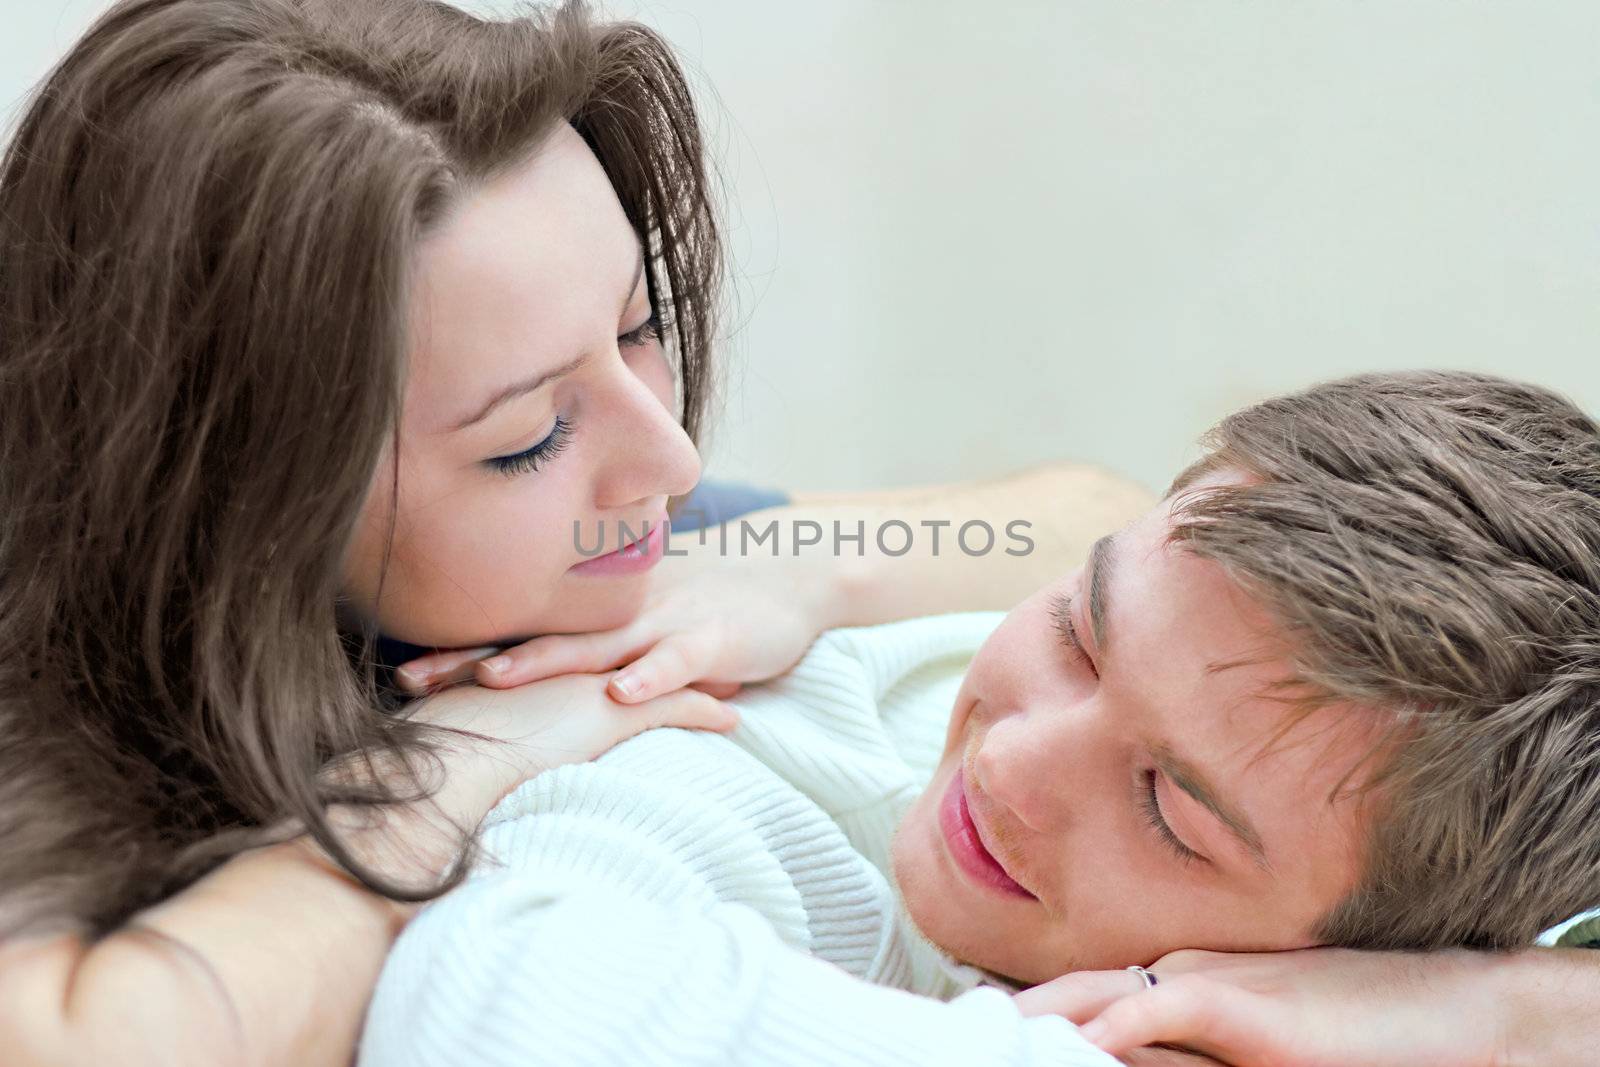 young boy and girl look at each other while lying on bed